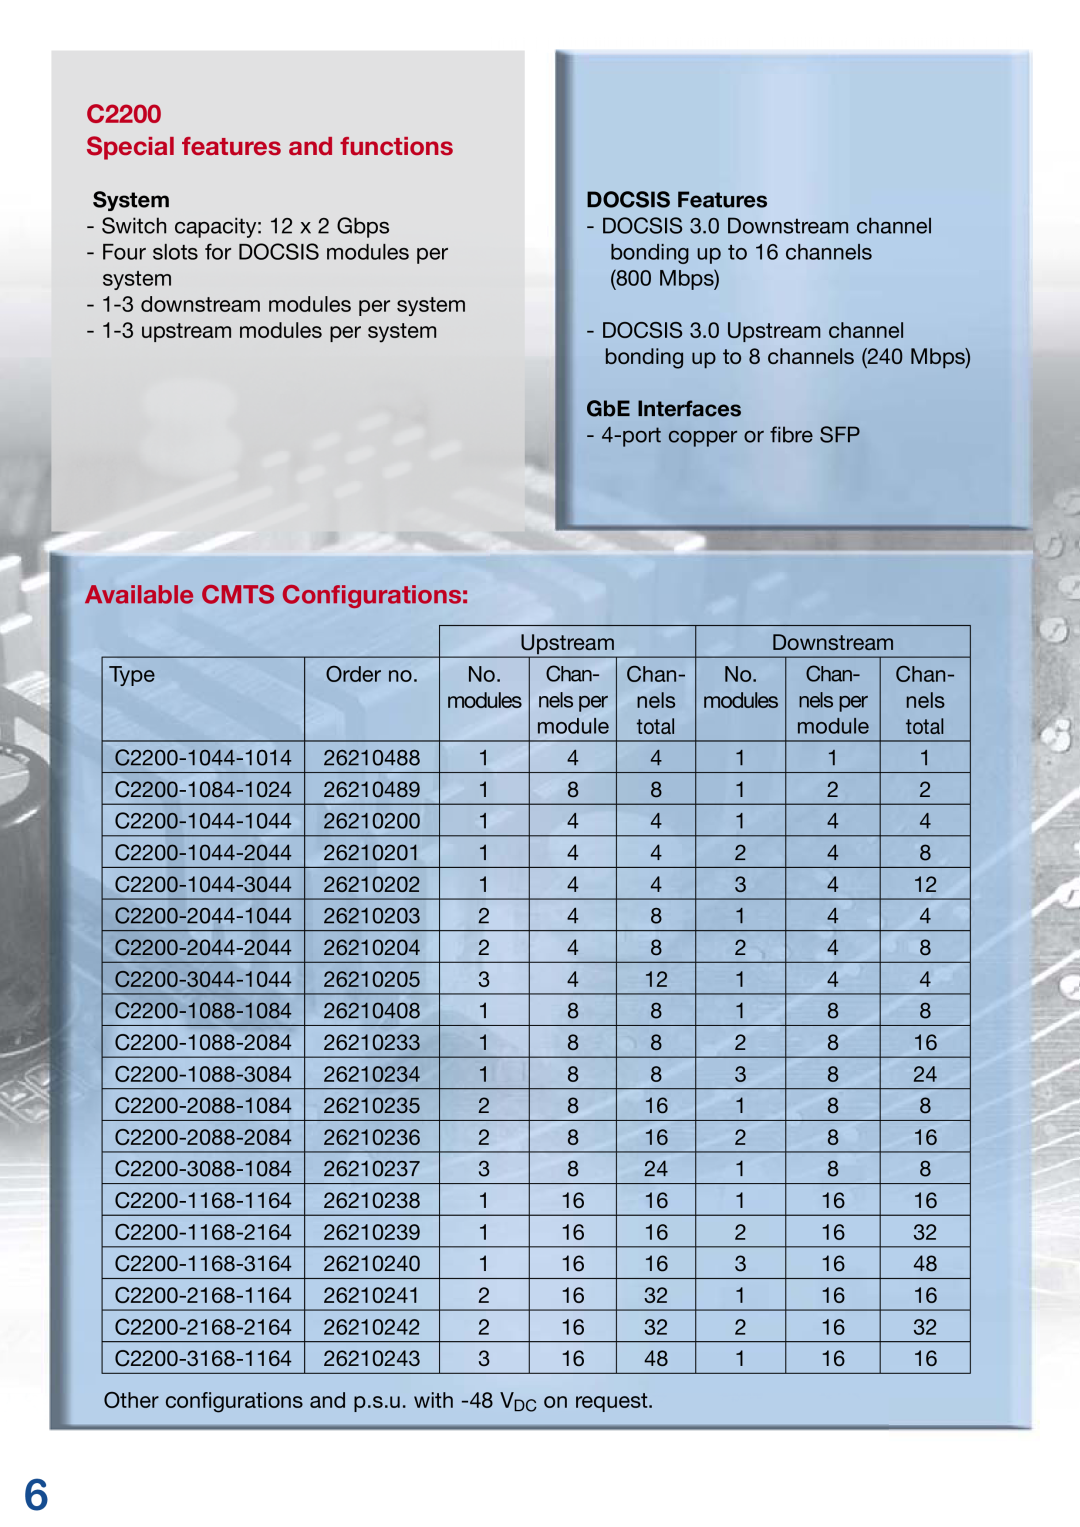 Kathrein 3 manual C2200 Special features and functions, Available CMTS Conﬁgurations, modules 